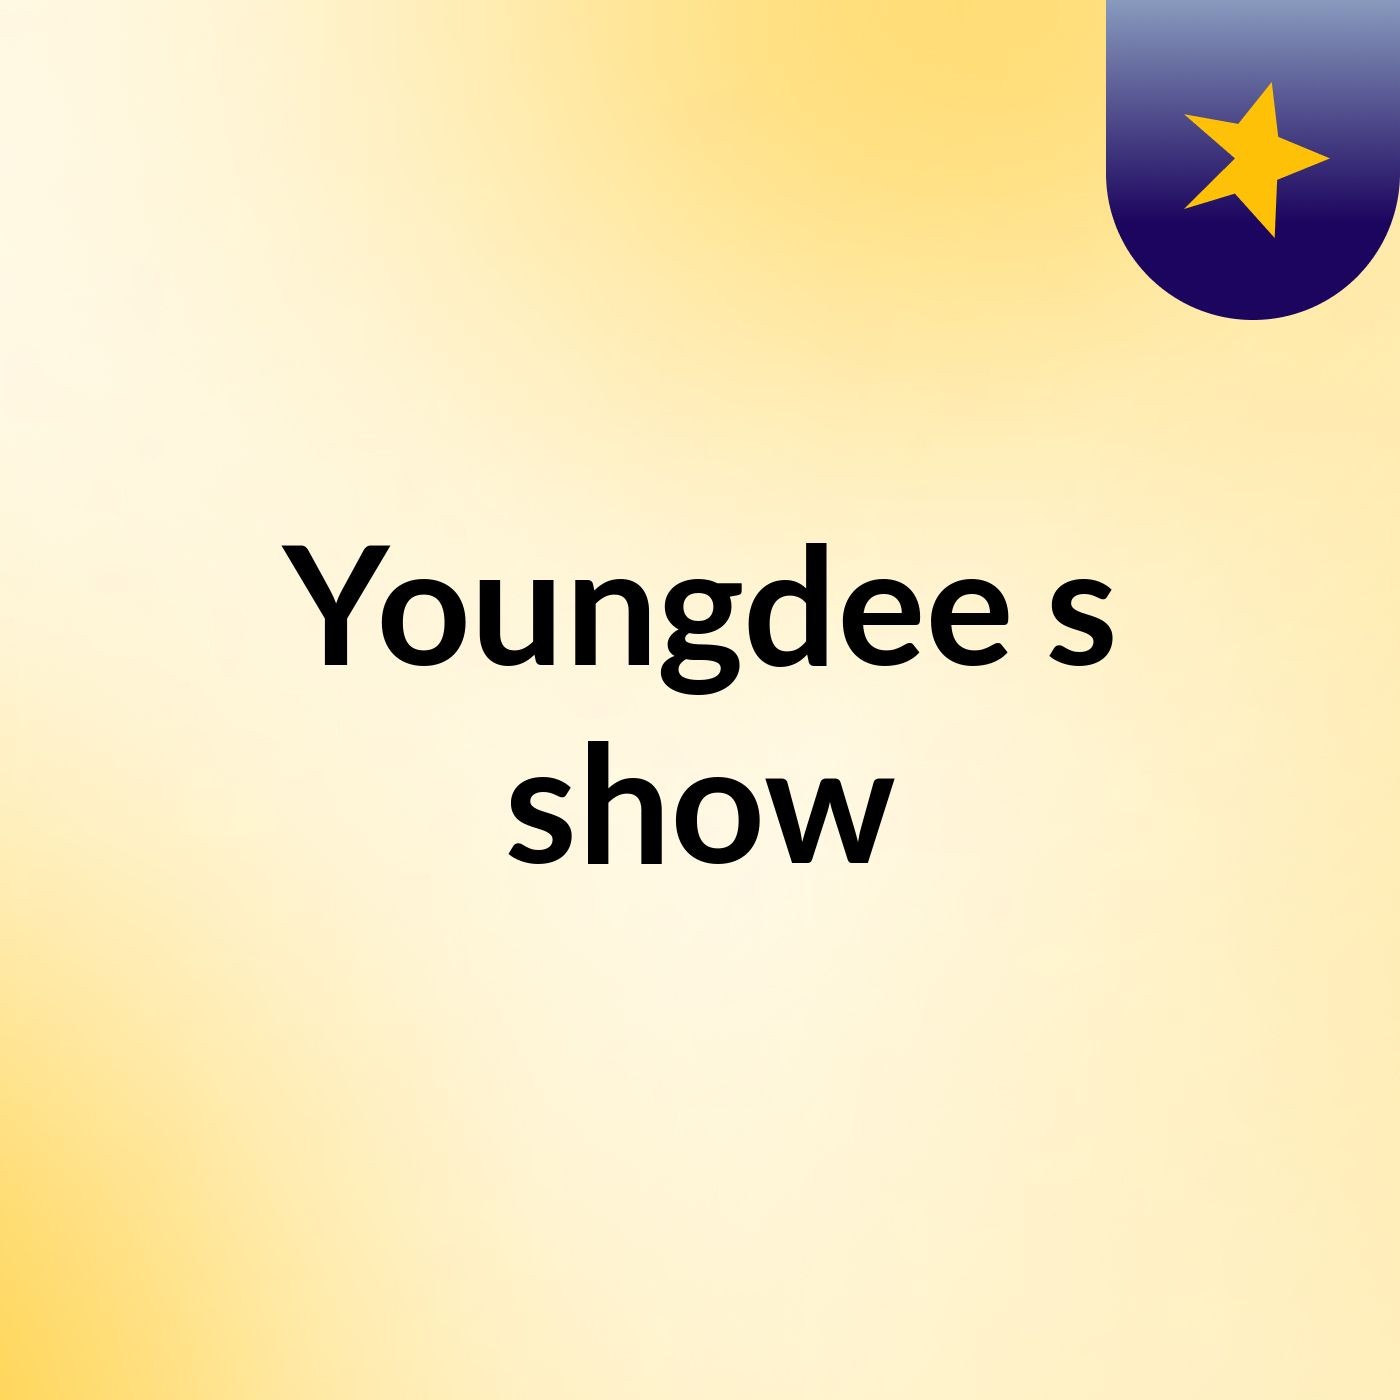 Youngdee's show